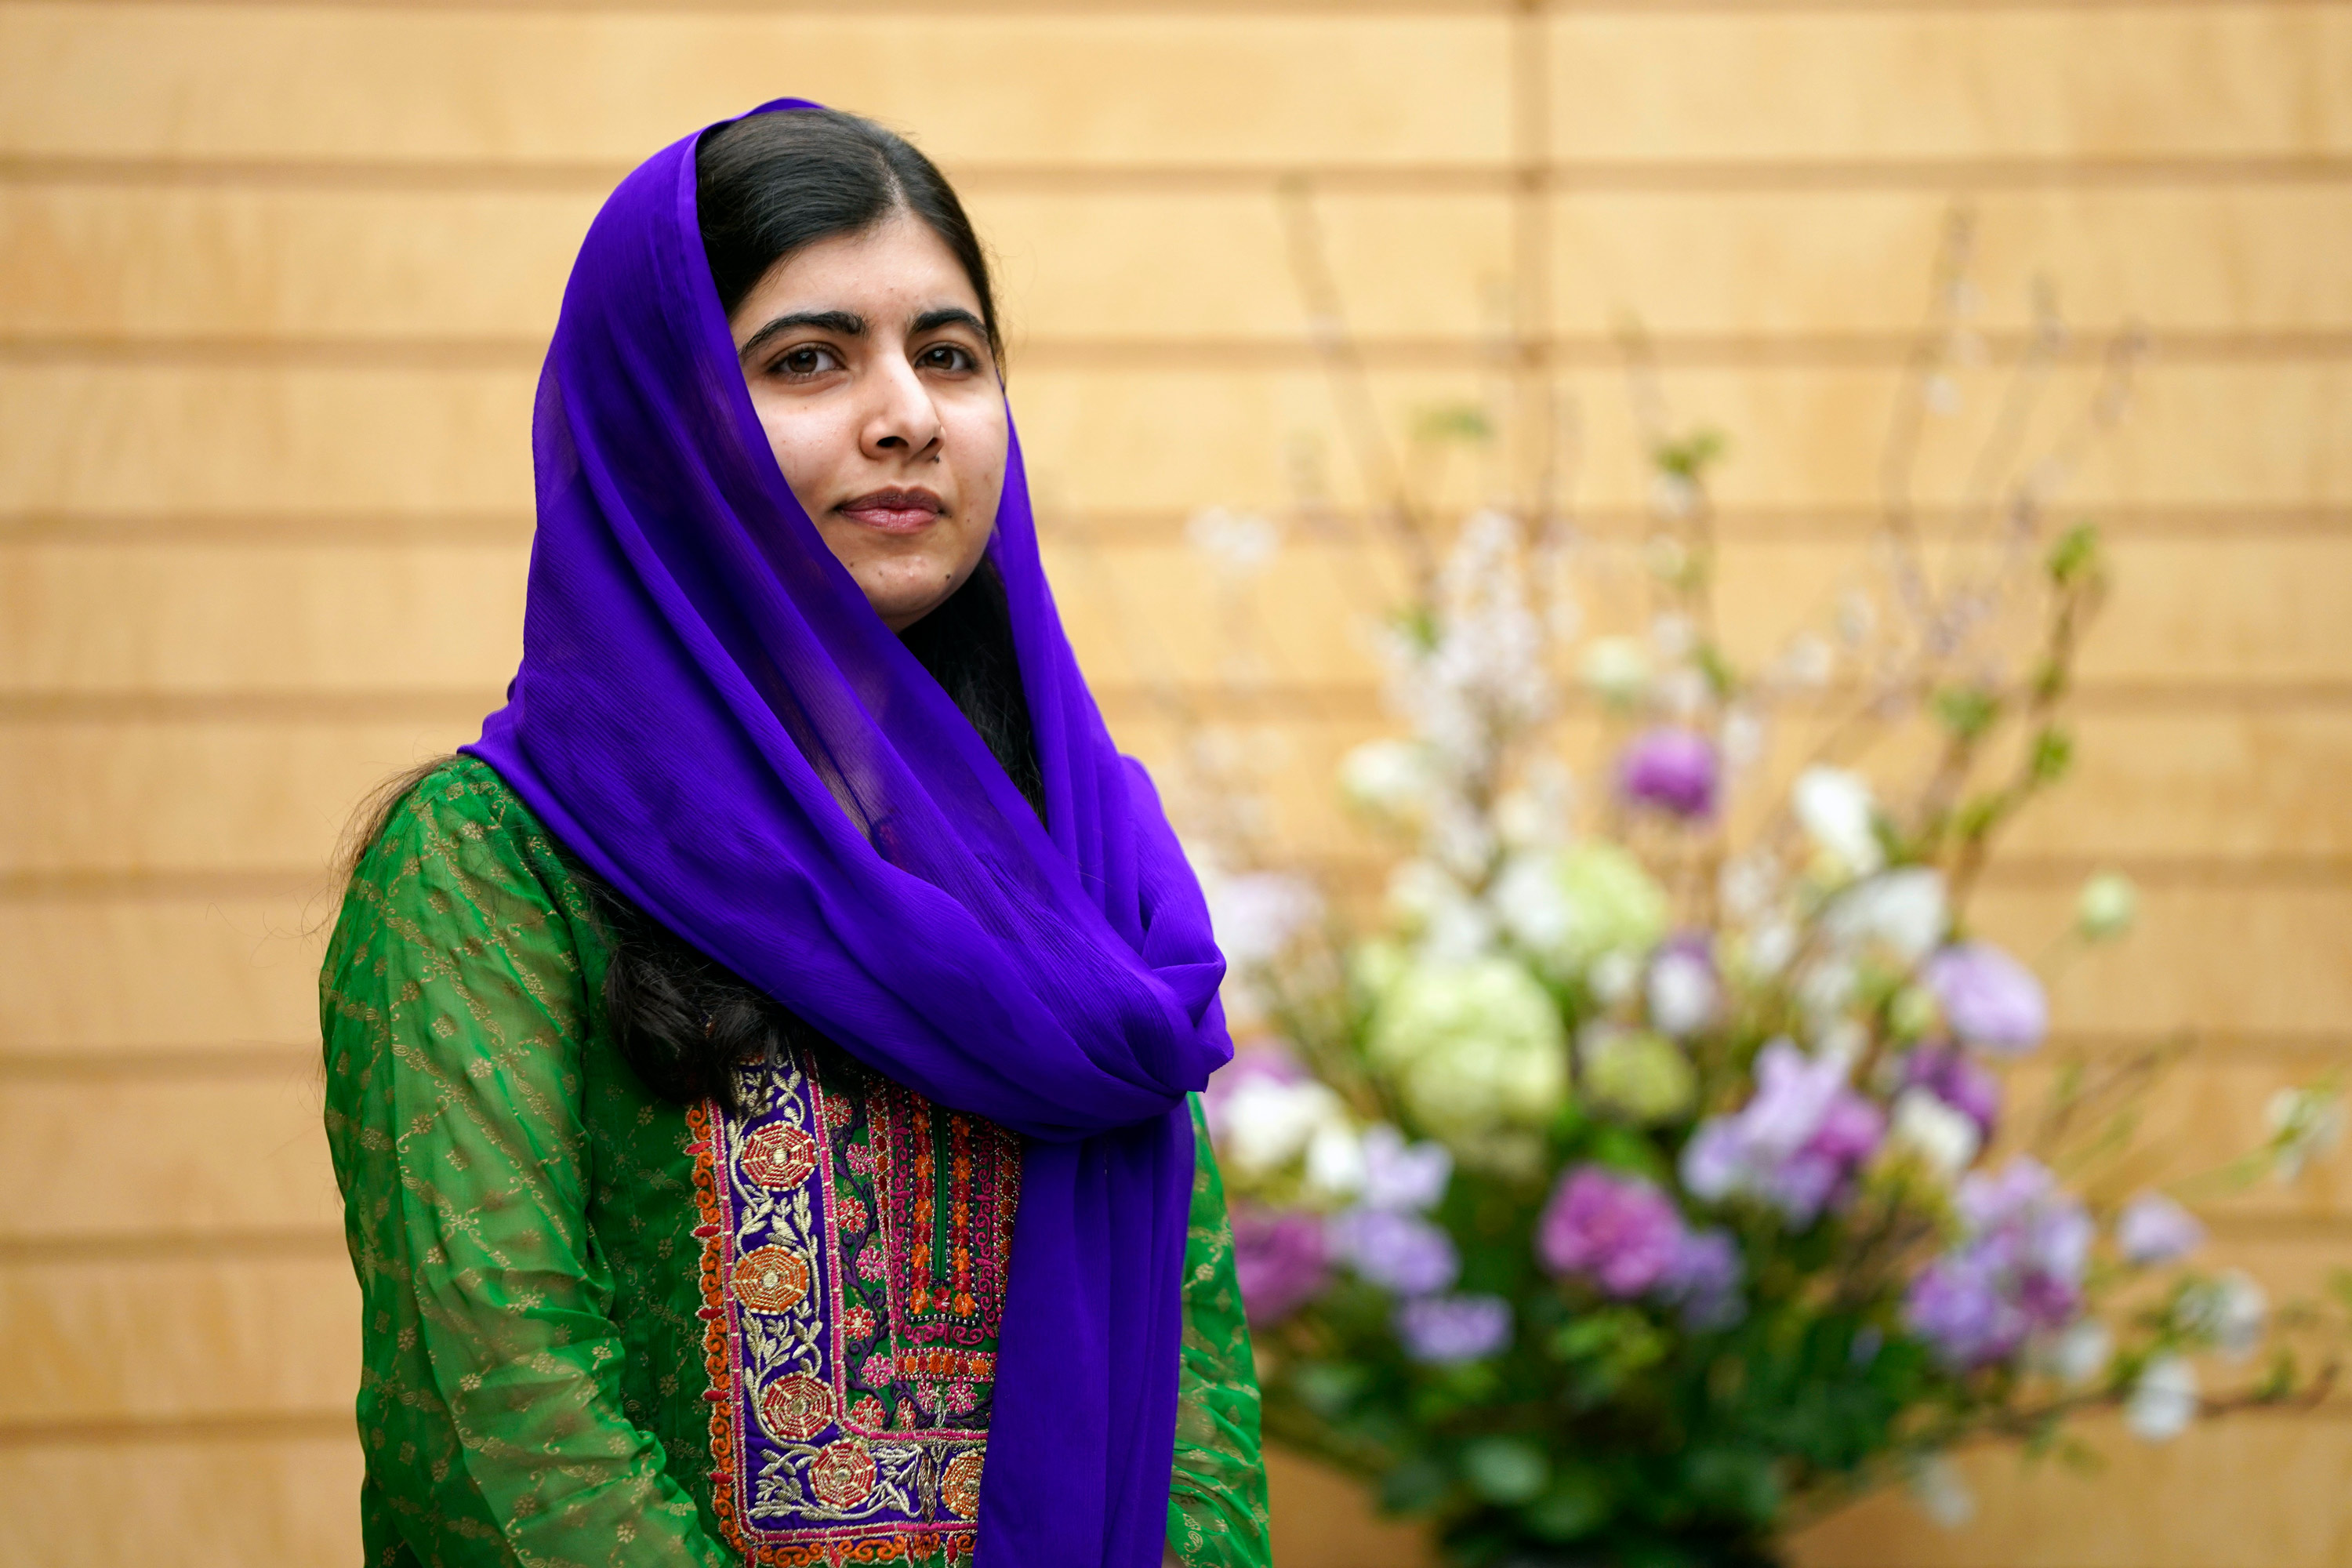 Malala Yousafzai lands Apple TV+ deal and discusses her hope for